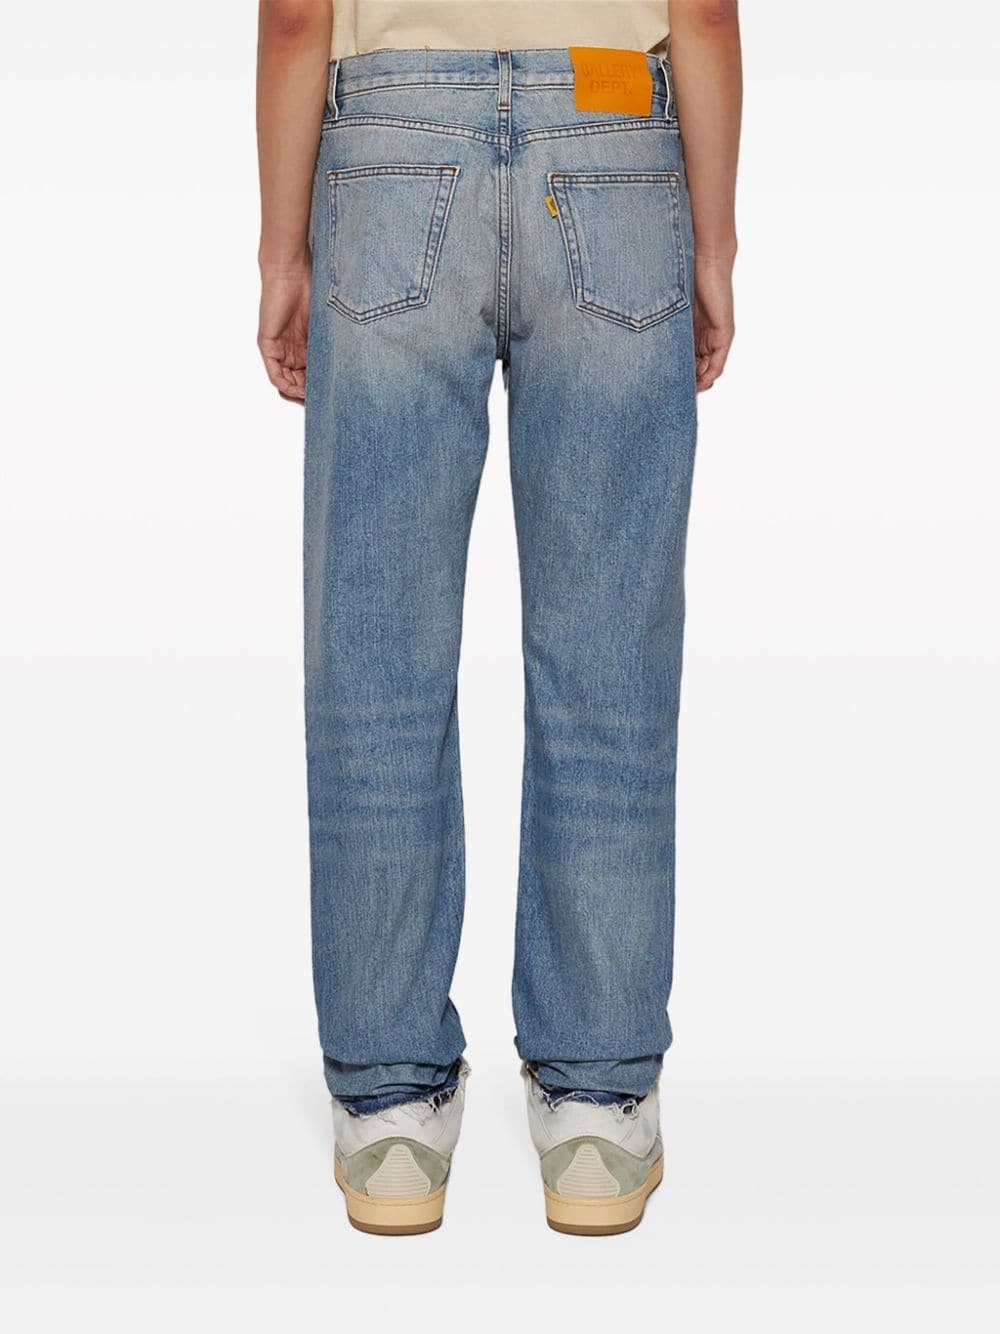 South Pointe 5001 jeans - 5